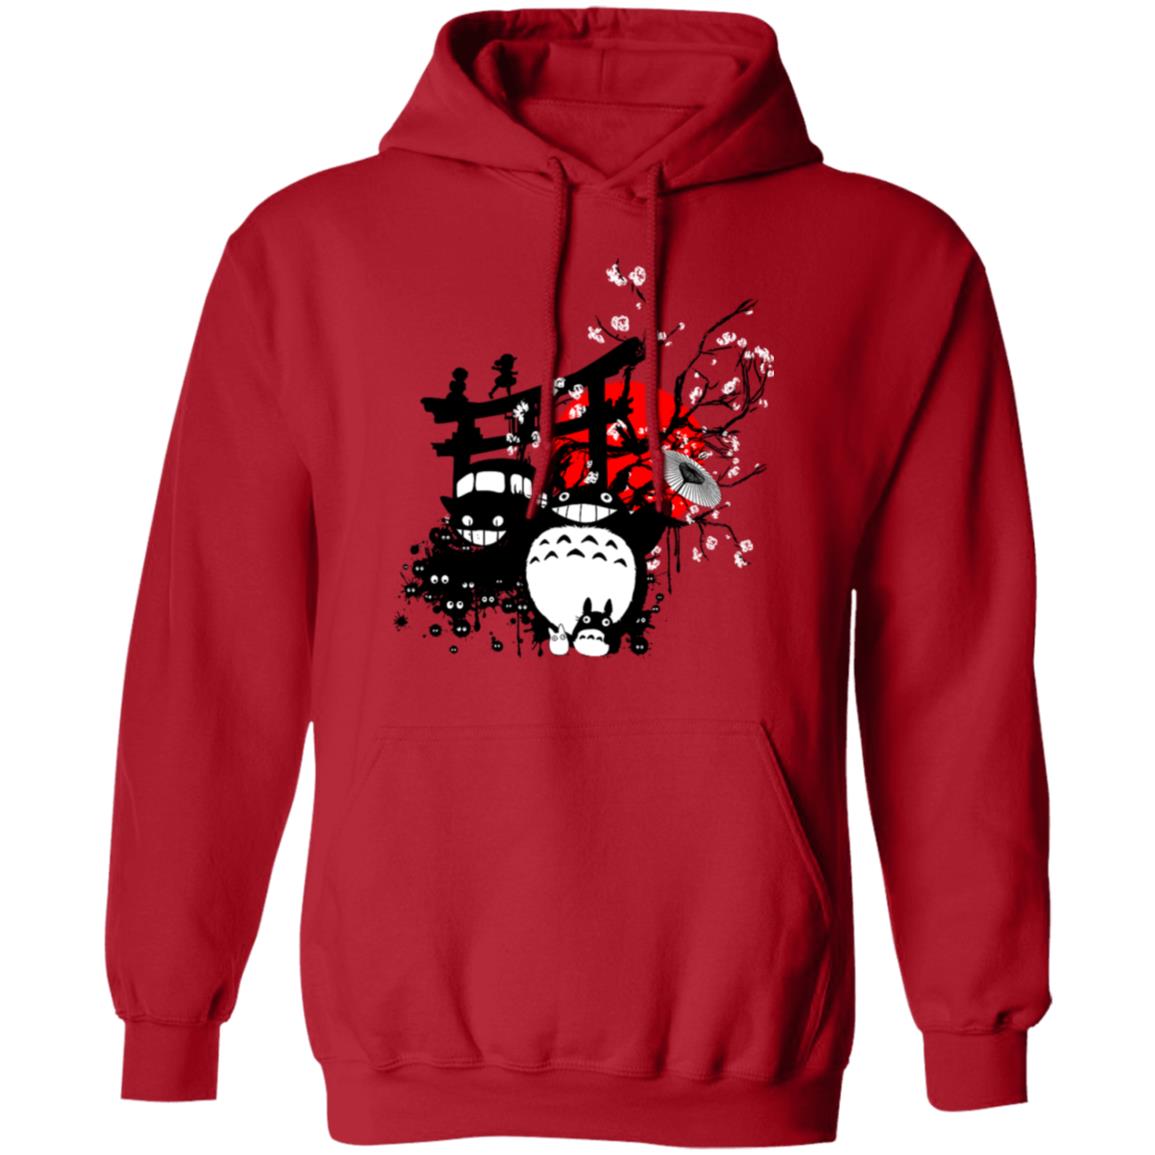 Totoro and Friends by the Red Moon Hoodie